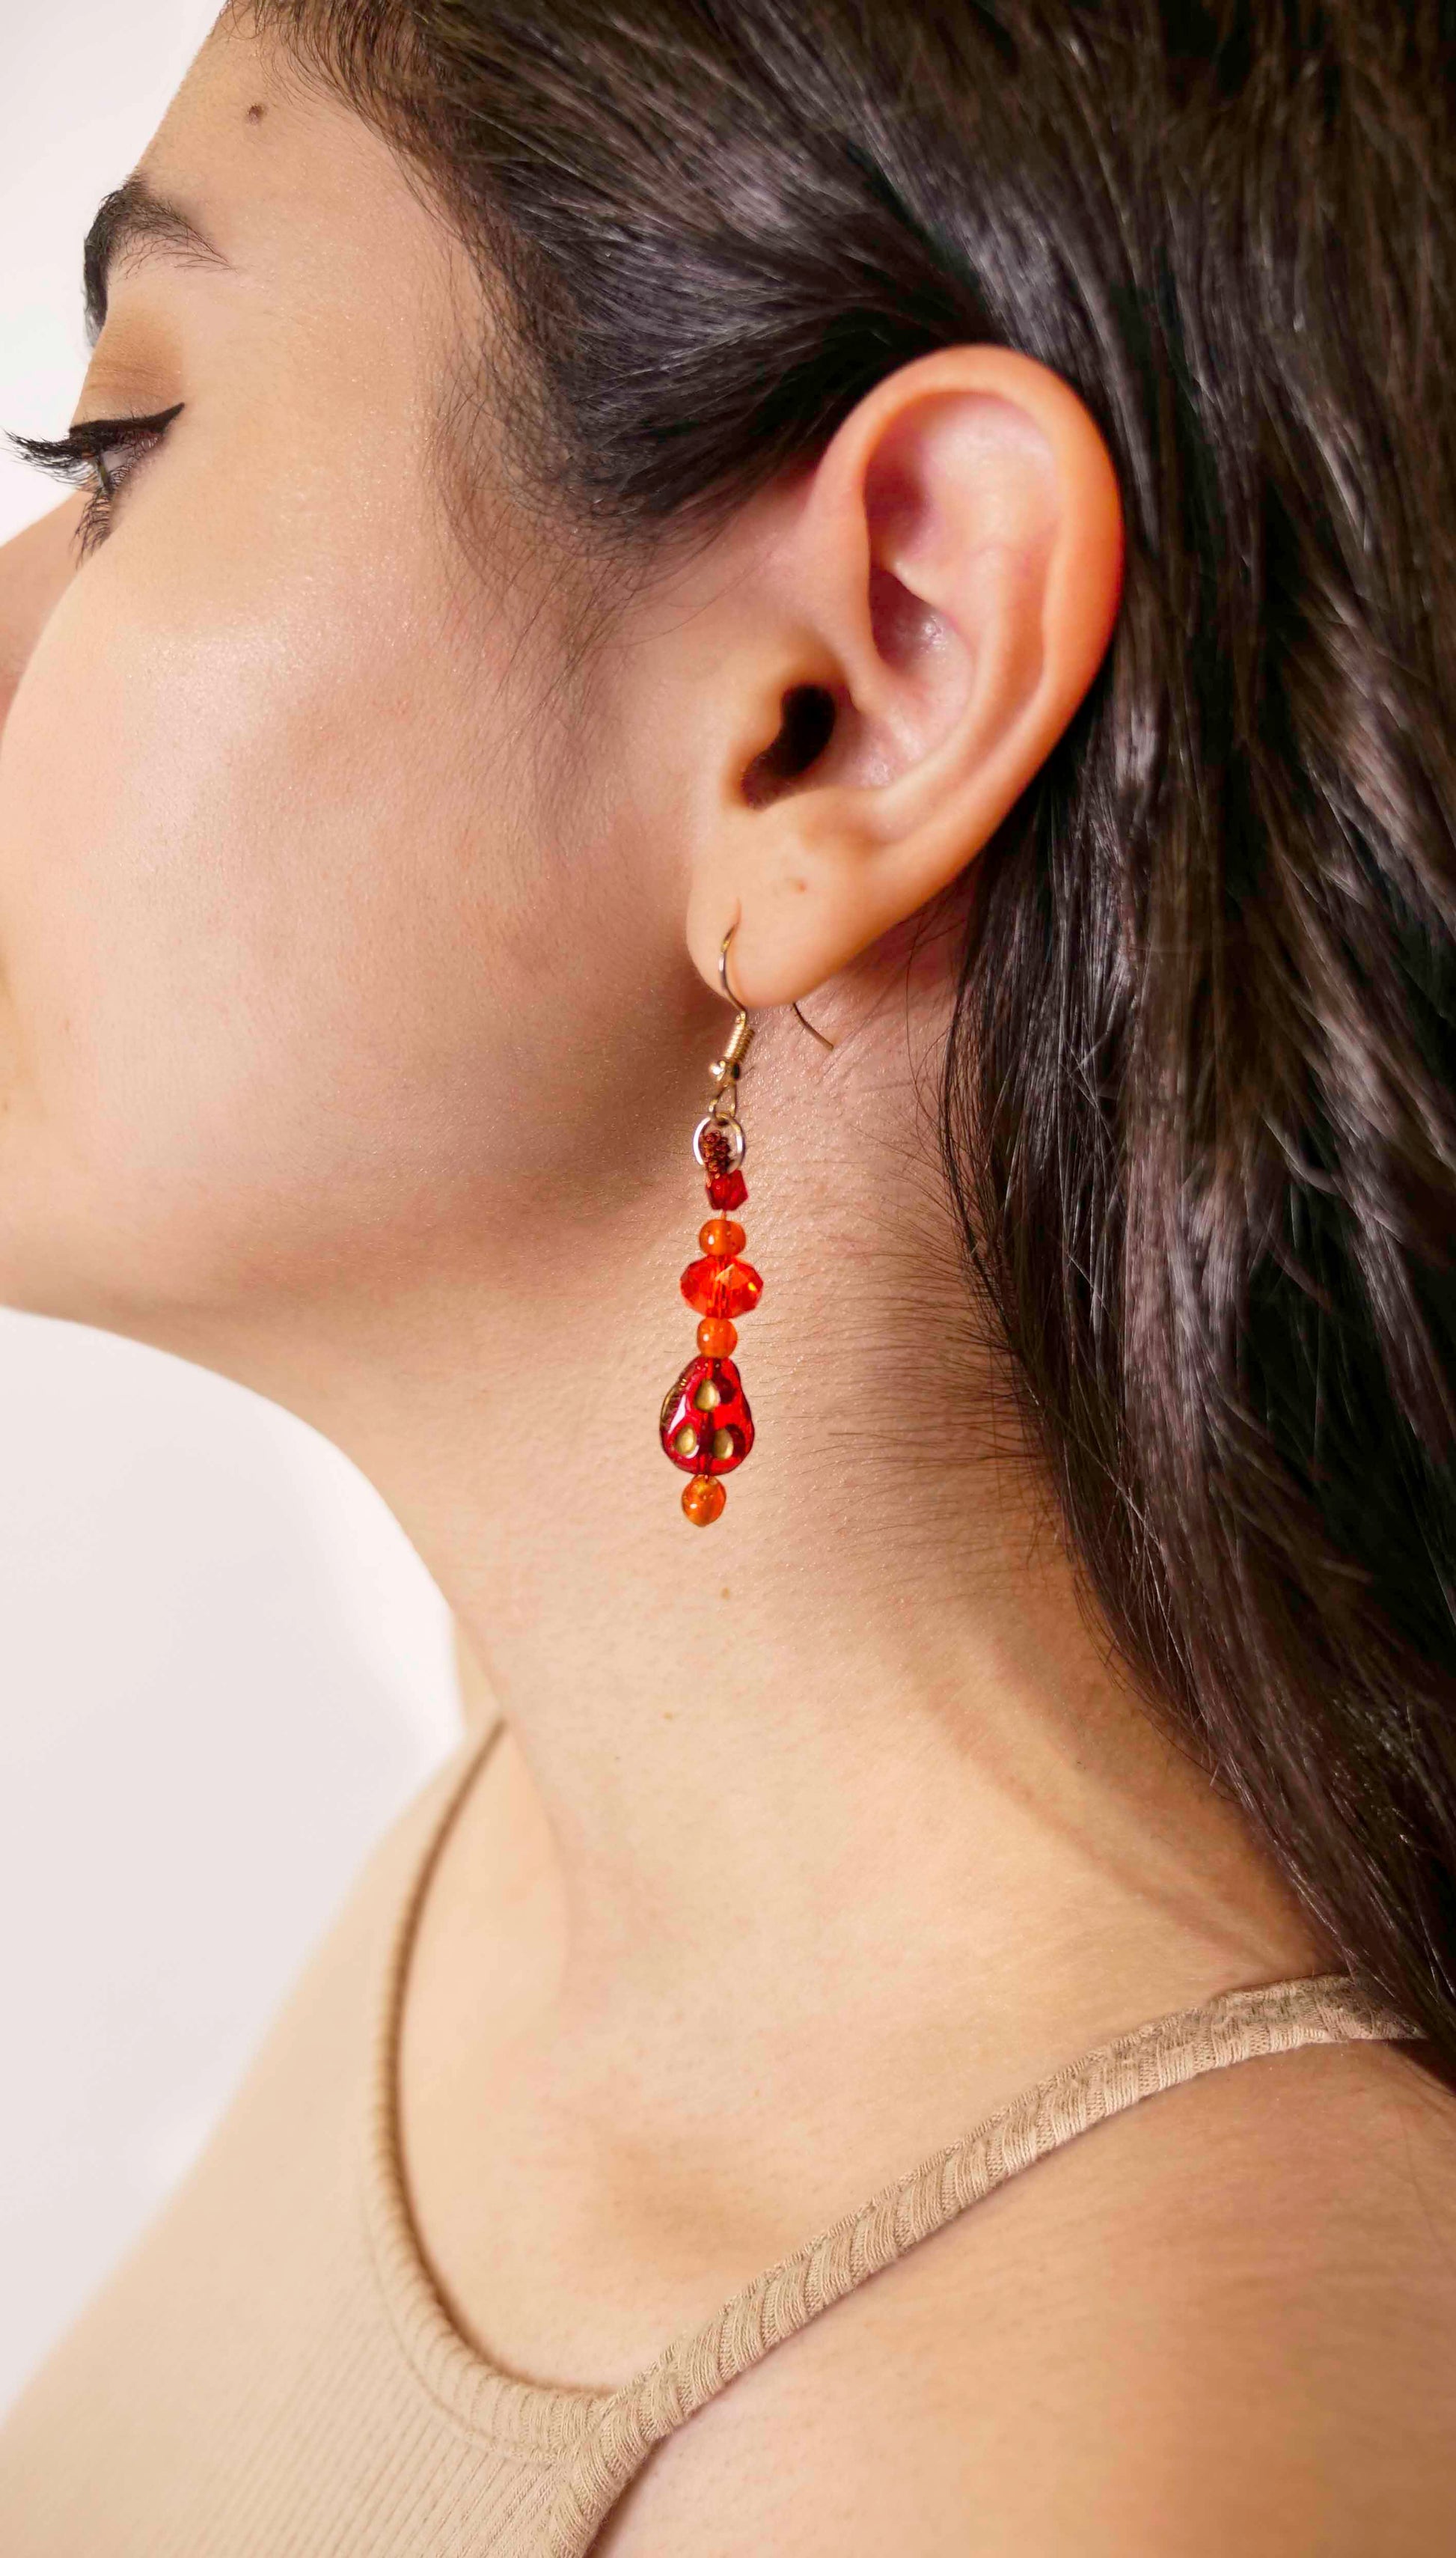 A handmade red and orange crystal beaded pair of dangle drop earrings with red glass charms.